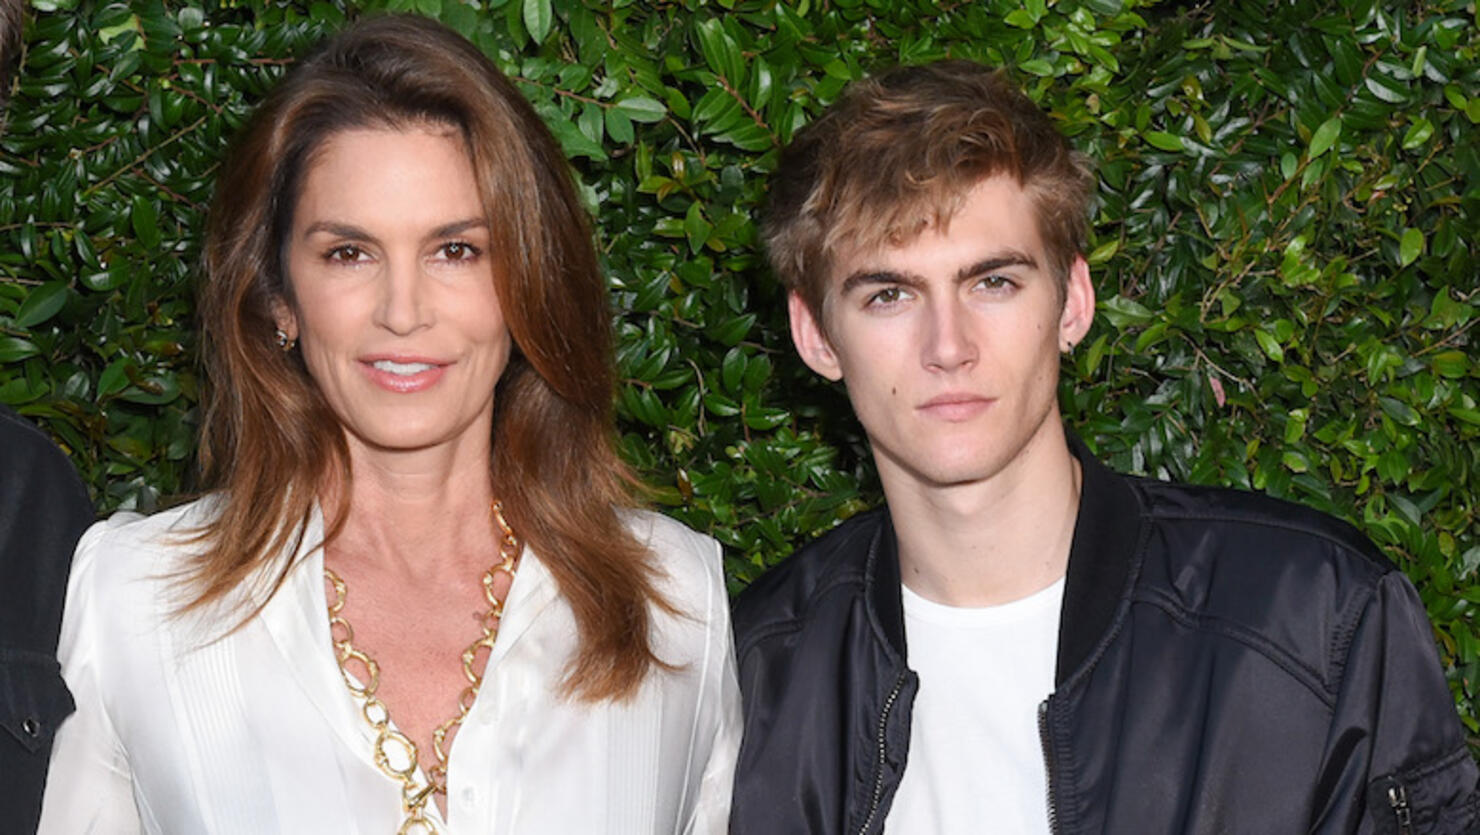 Cindy Crawford S Son Presley Gerber Shows Off Dramatic Face Tattoo Iheart